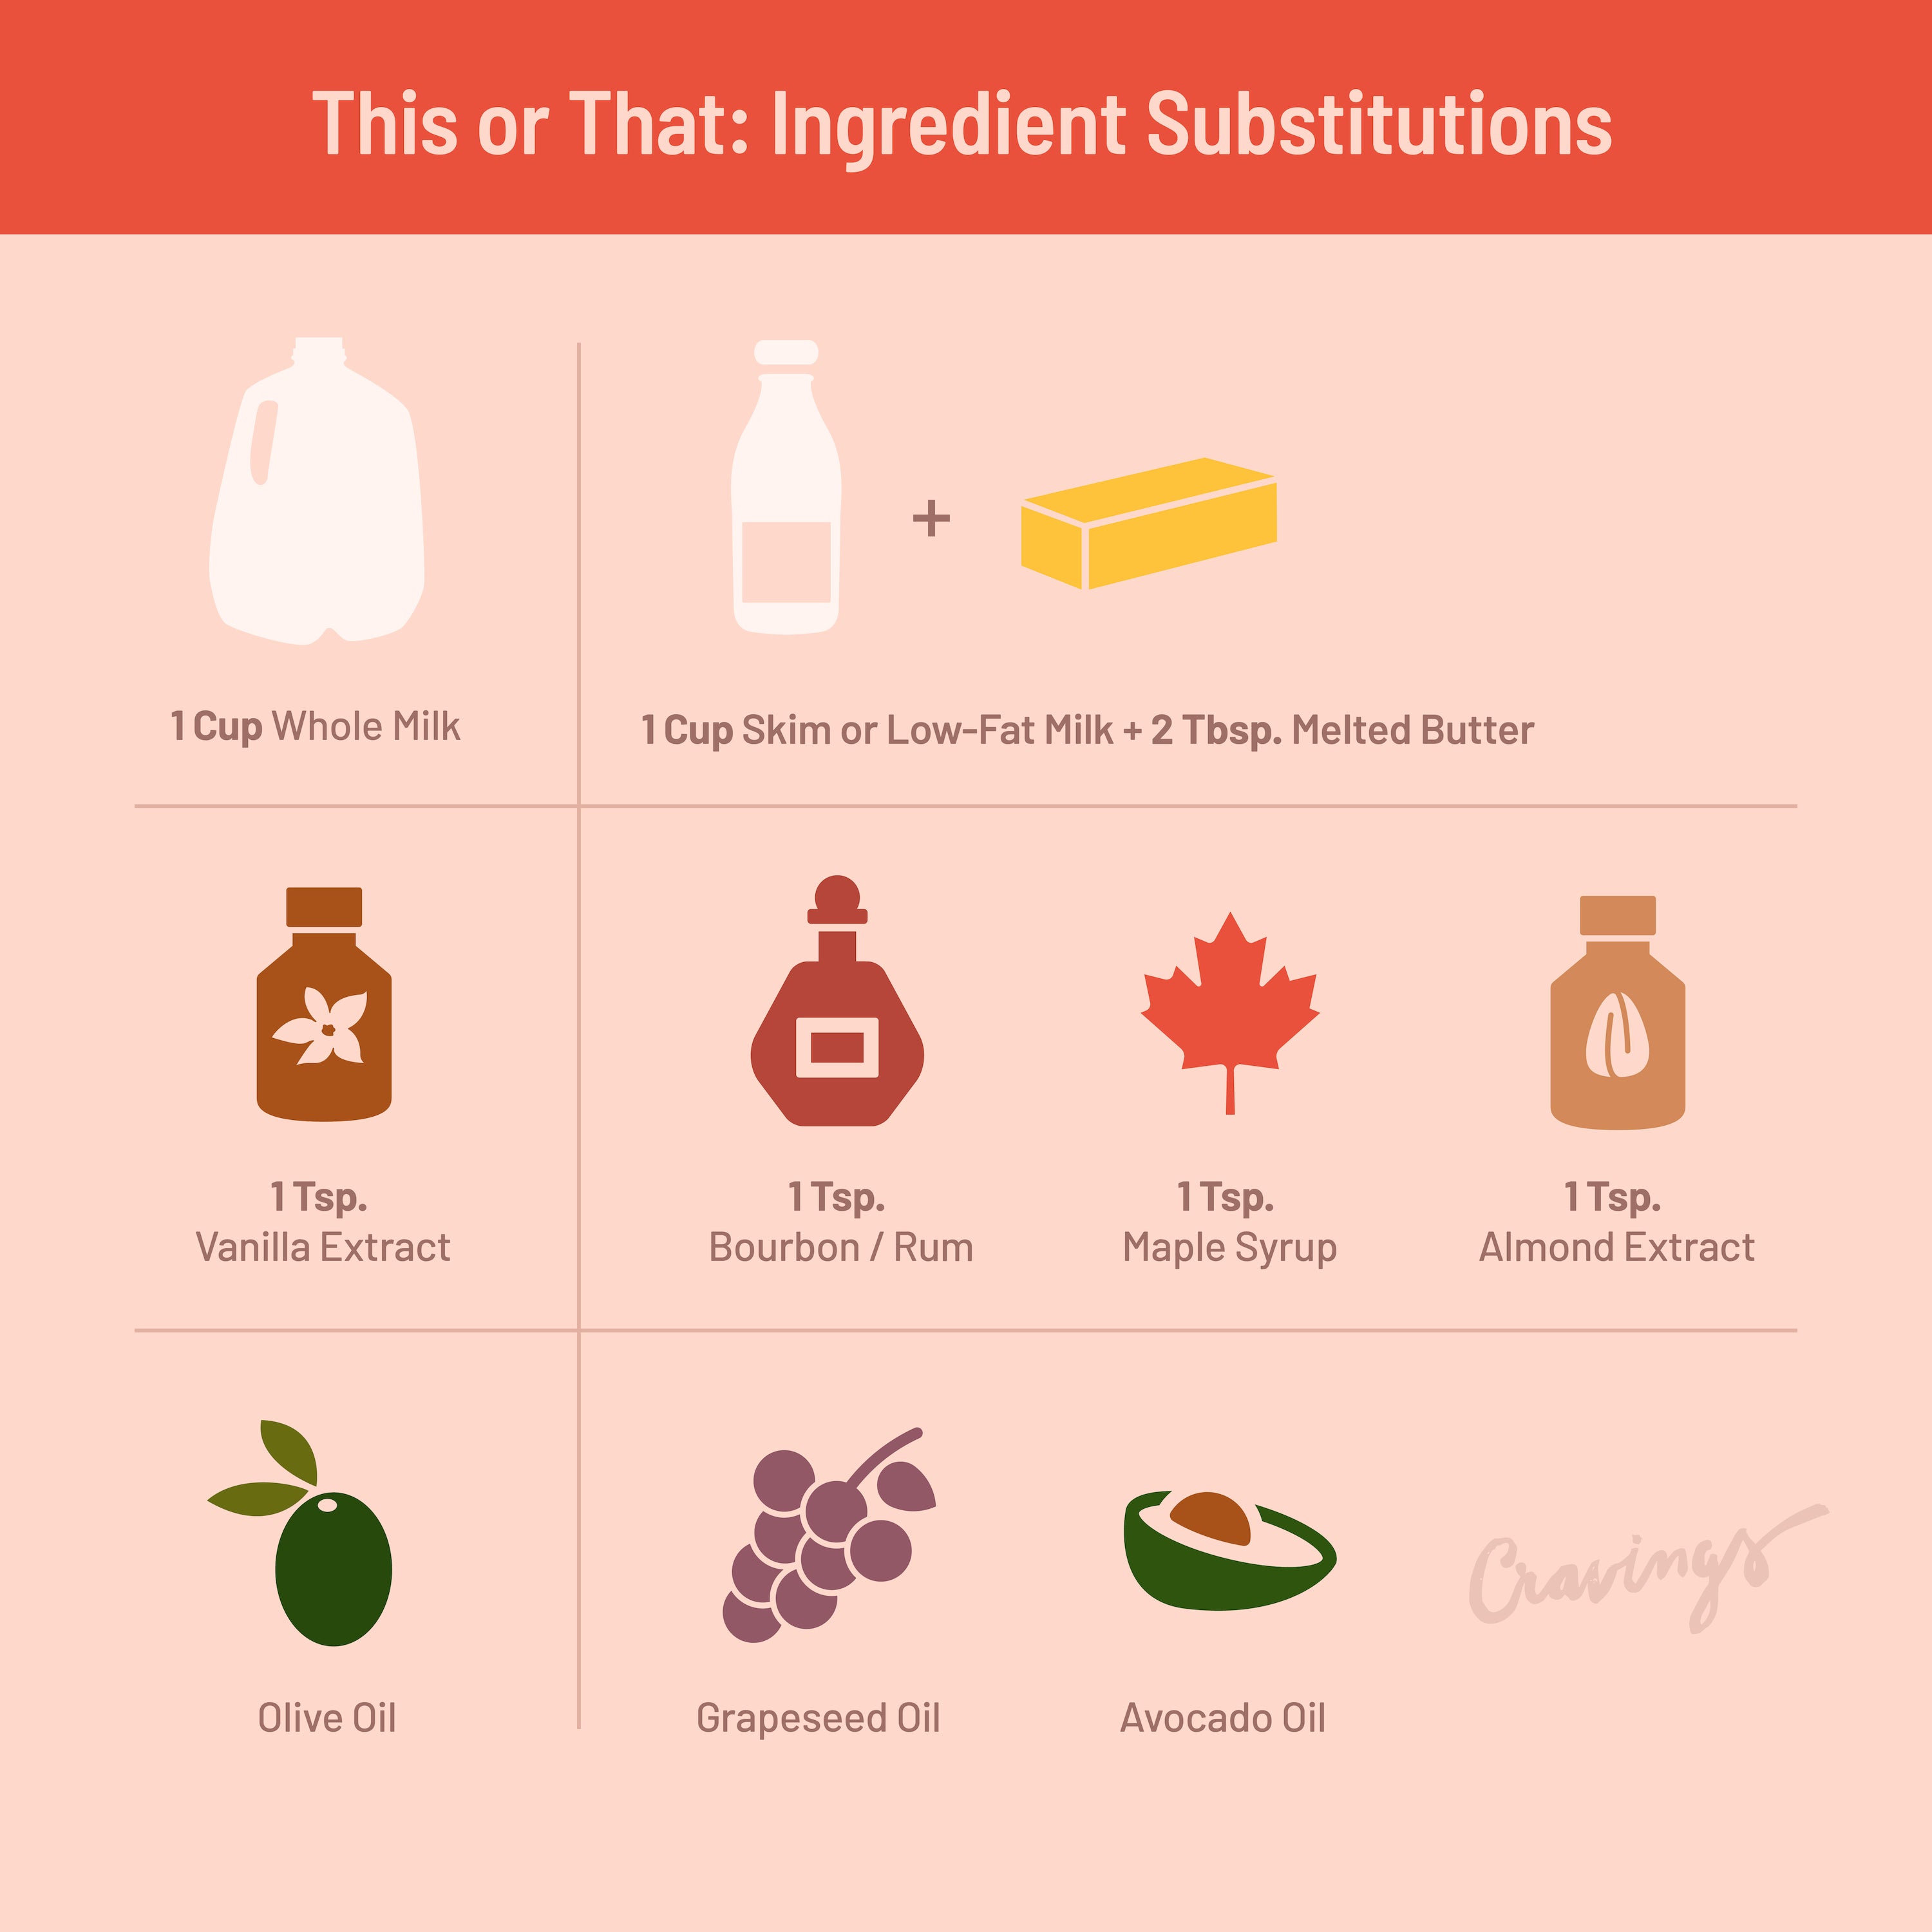 Missing an Ingredient? Use This!